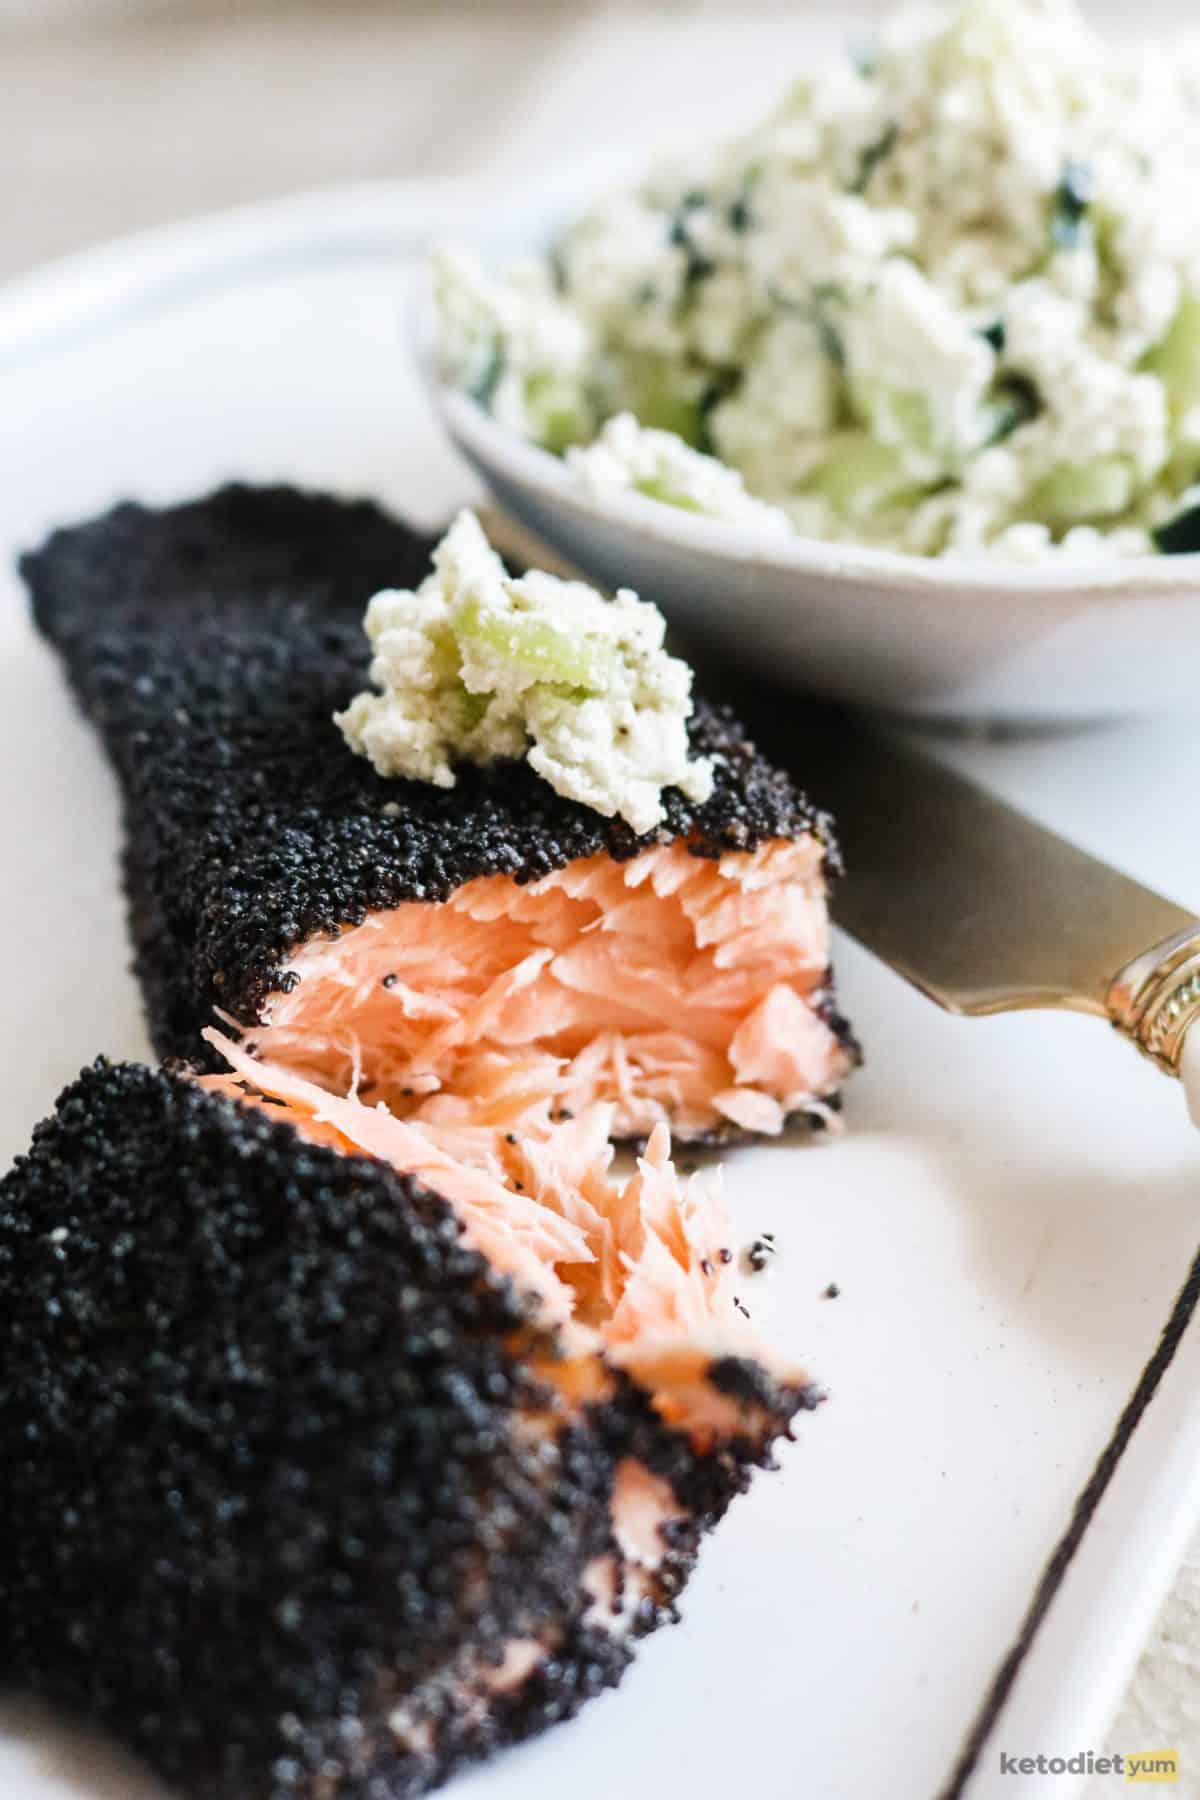 Delicious poppy seed crusted salmon fillets that are tender and crunchy